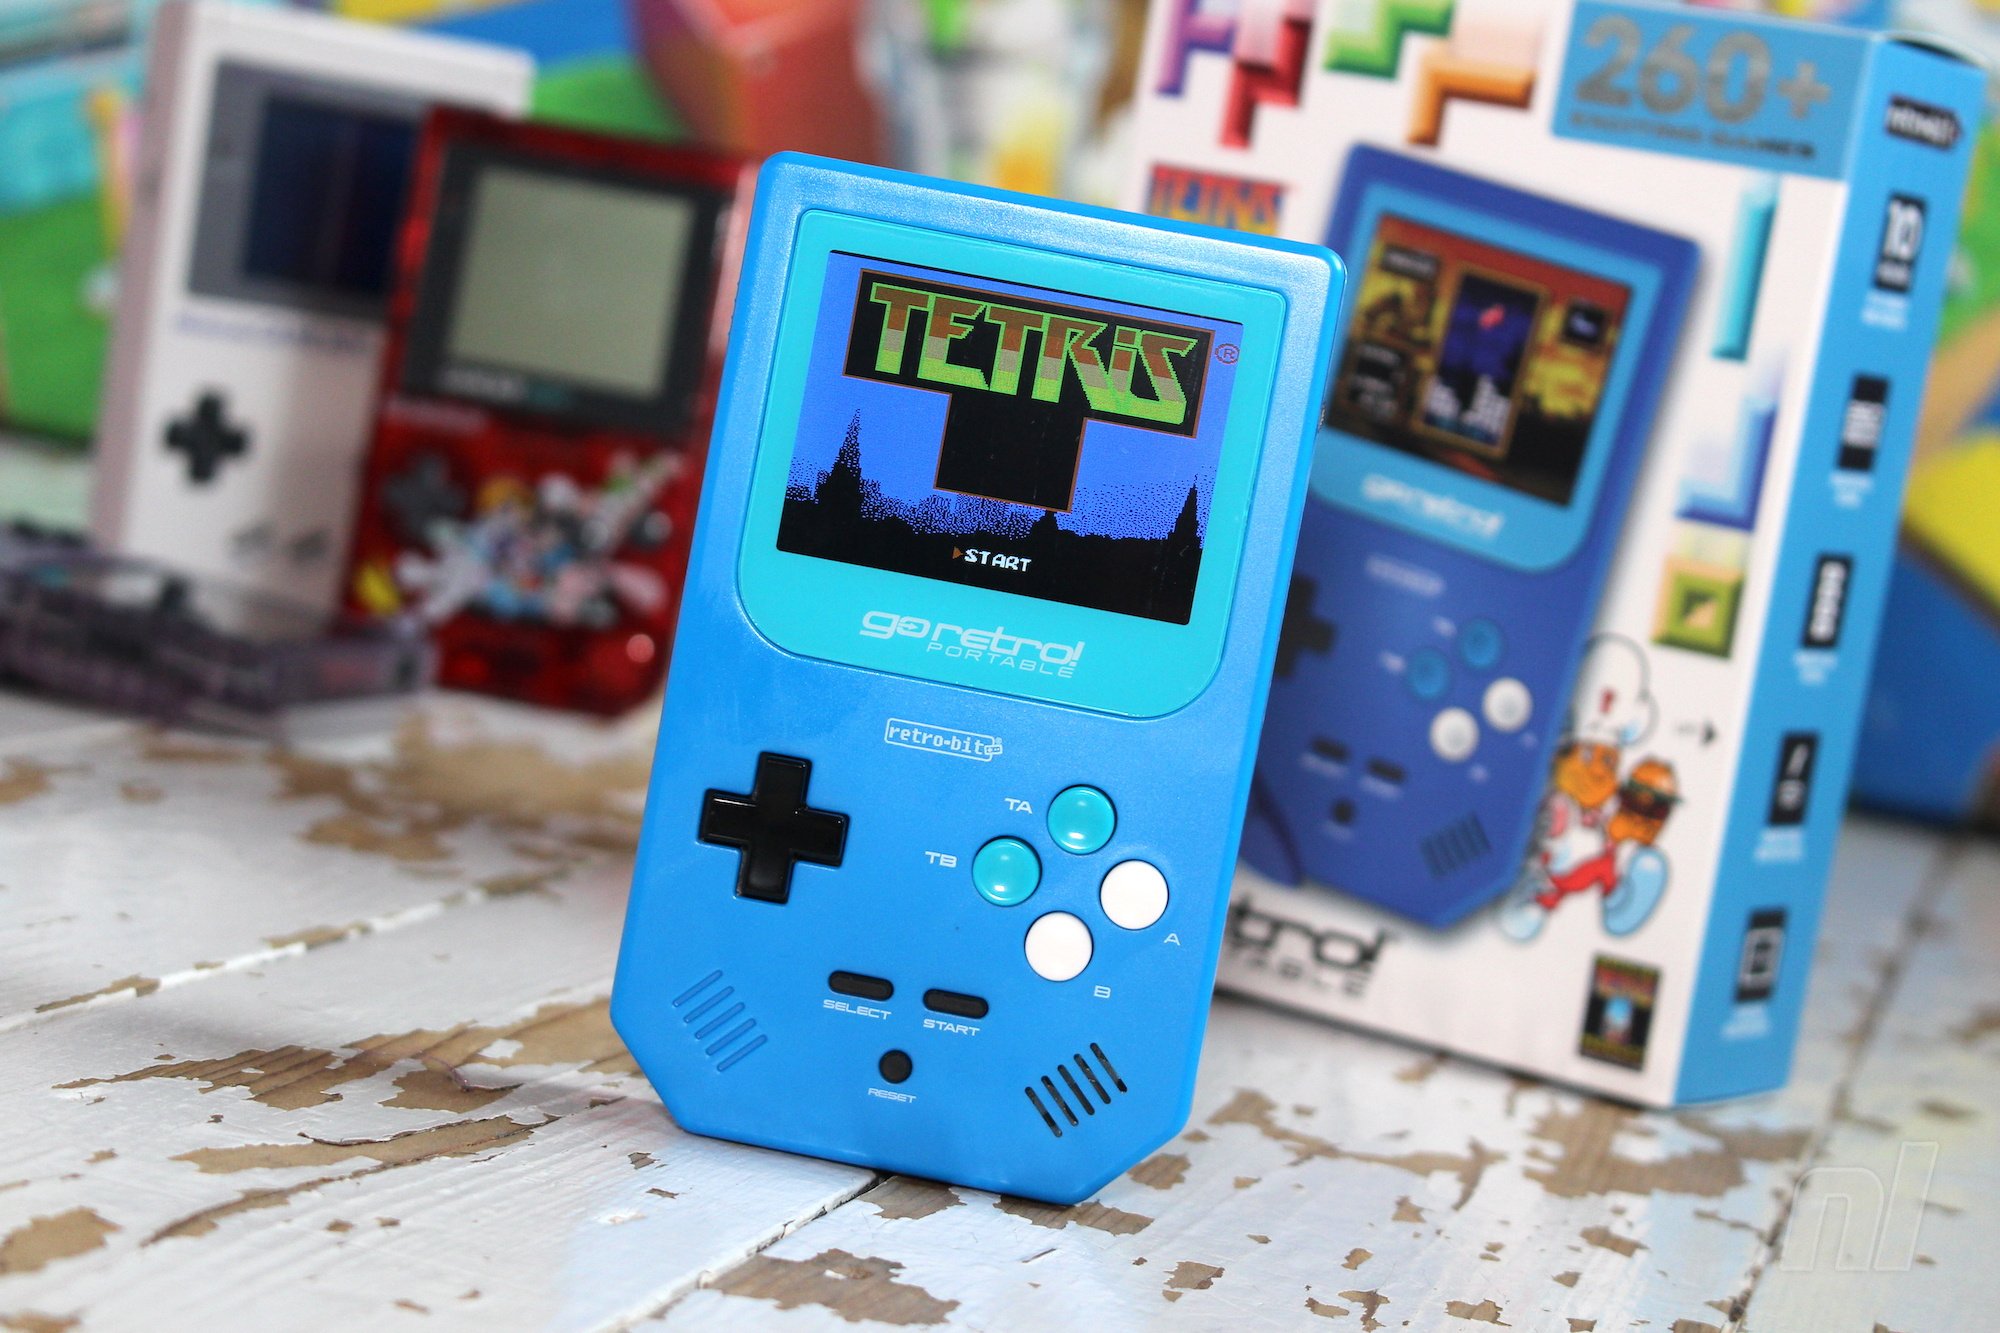 Hardware Review The Retro Bit Go Retro Portable Is A Rose Tinted.